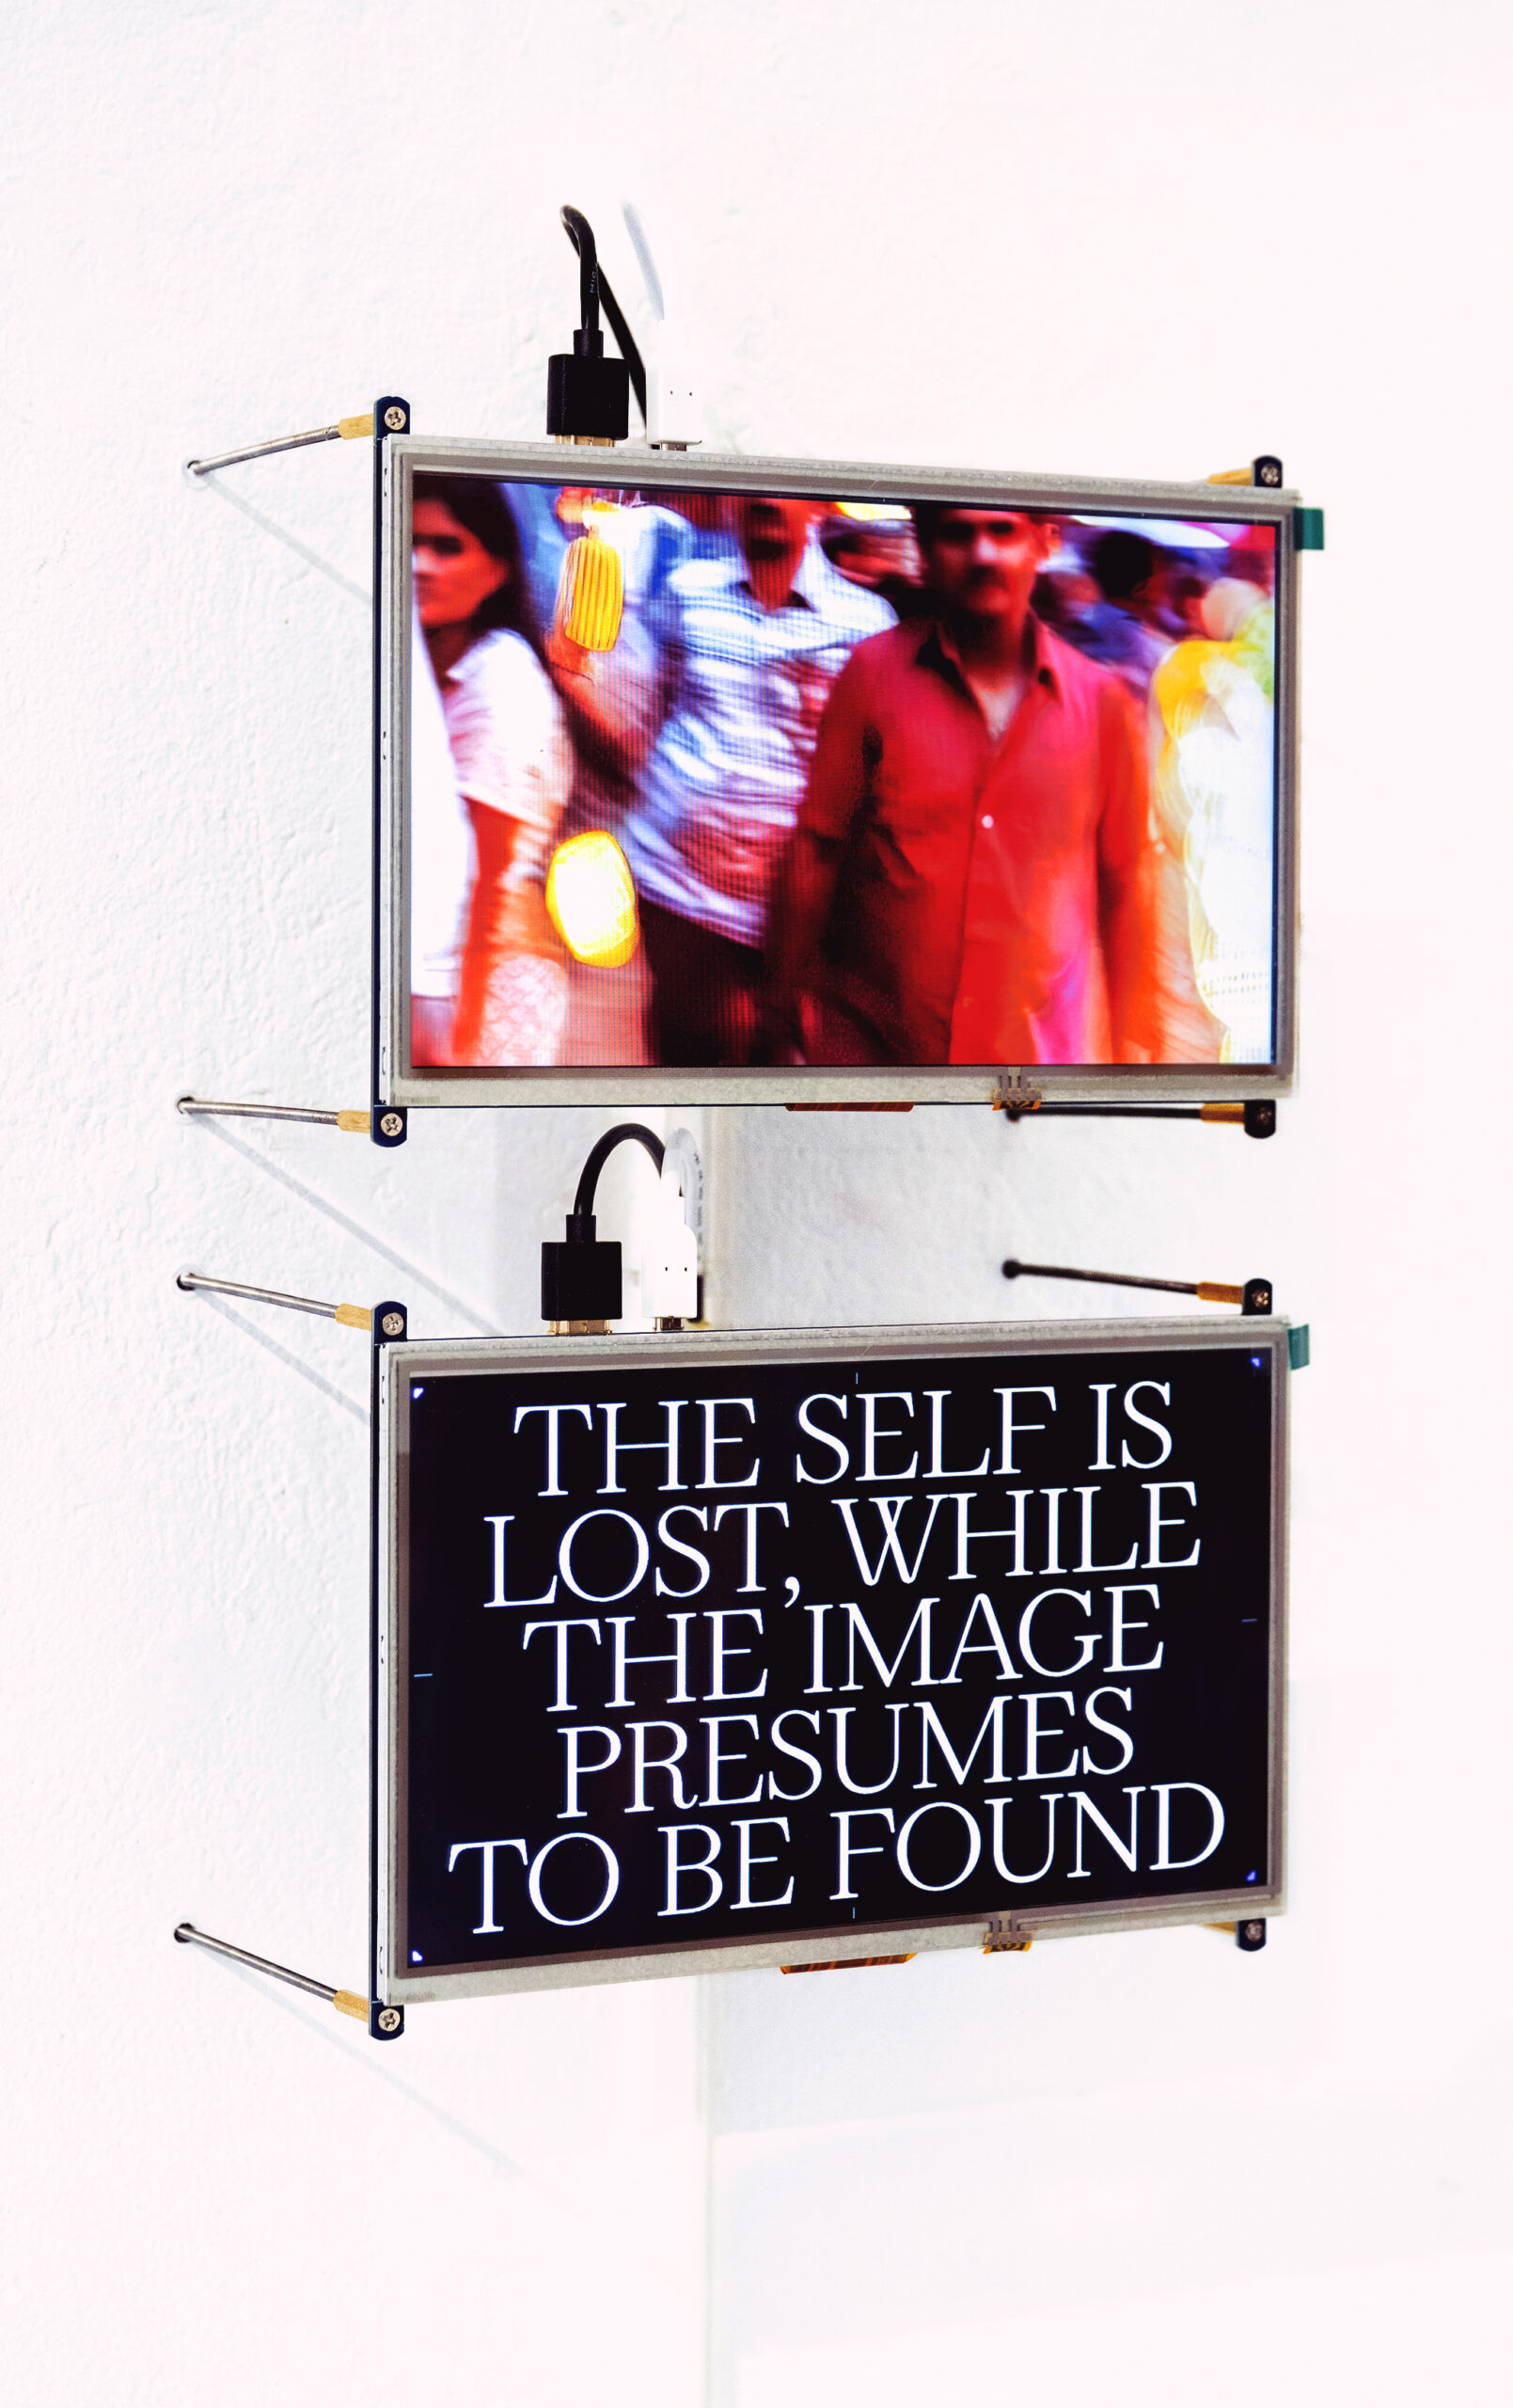 A photograph of a two-channel video installation, with two thin small-sized screens placed vertically on a wall. The screen above shows an video of crowds of people, while the screen below depicts a text that reads "The self is lost, while the image presumes to be found". This text is in styled in all capitals, white serif font on a black background.